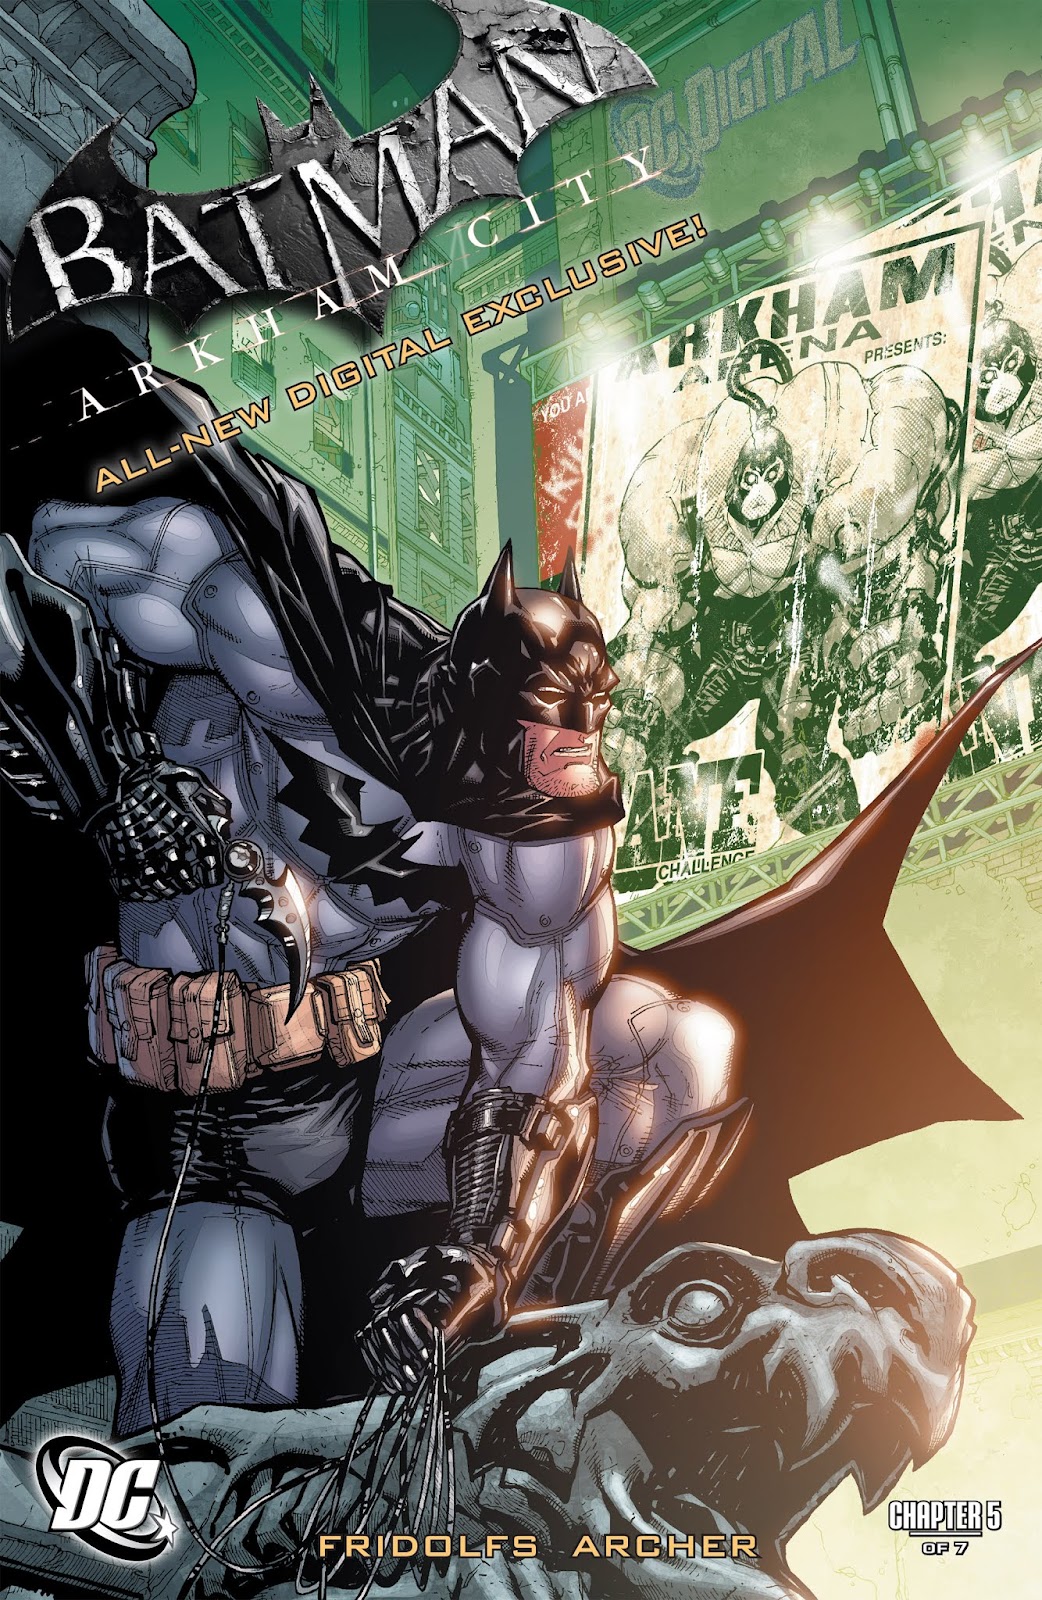 Batman Arkham City Digital Chapter Issue 5 | Read Batman Arkham City  Digital Chapter Issue 5 comic online in high quality. Read Full Comic  online for free - Read comics online in high quality .